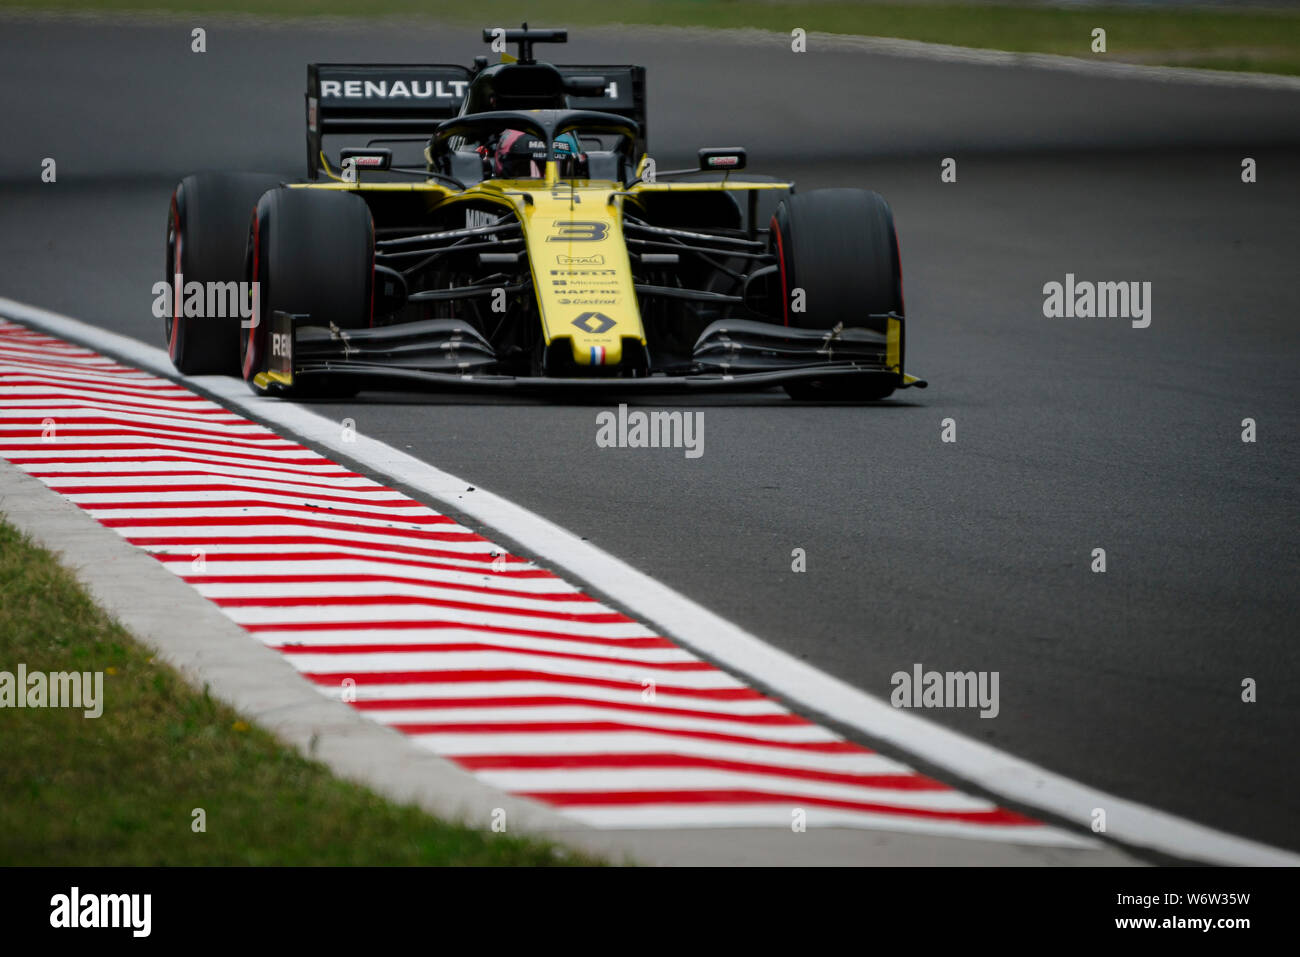 Renault Sport F1 Team’s Australian driver Daniel Ricciardo competes during the first practice session of the Hungarian F1 Grand Prix. Stock Photo